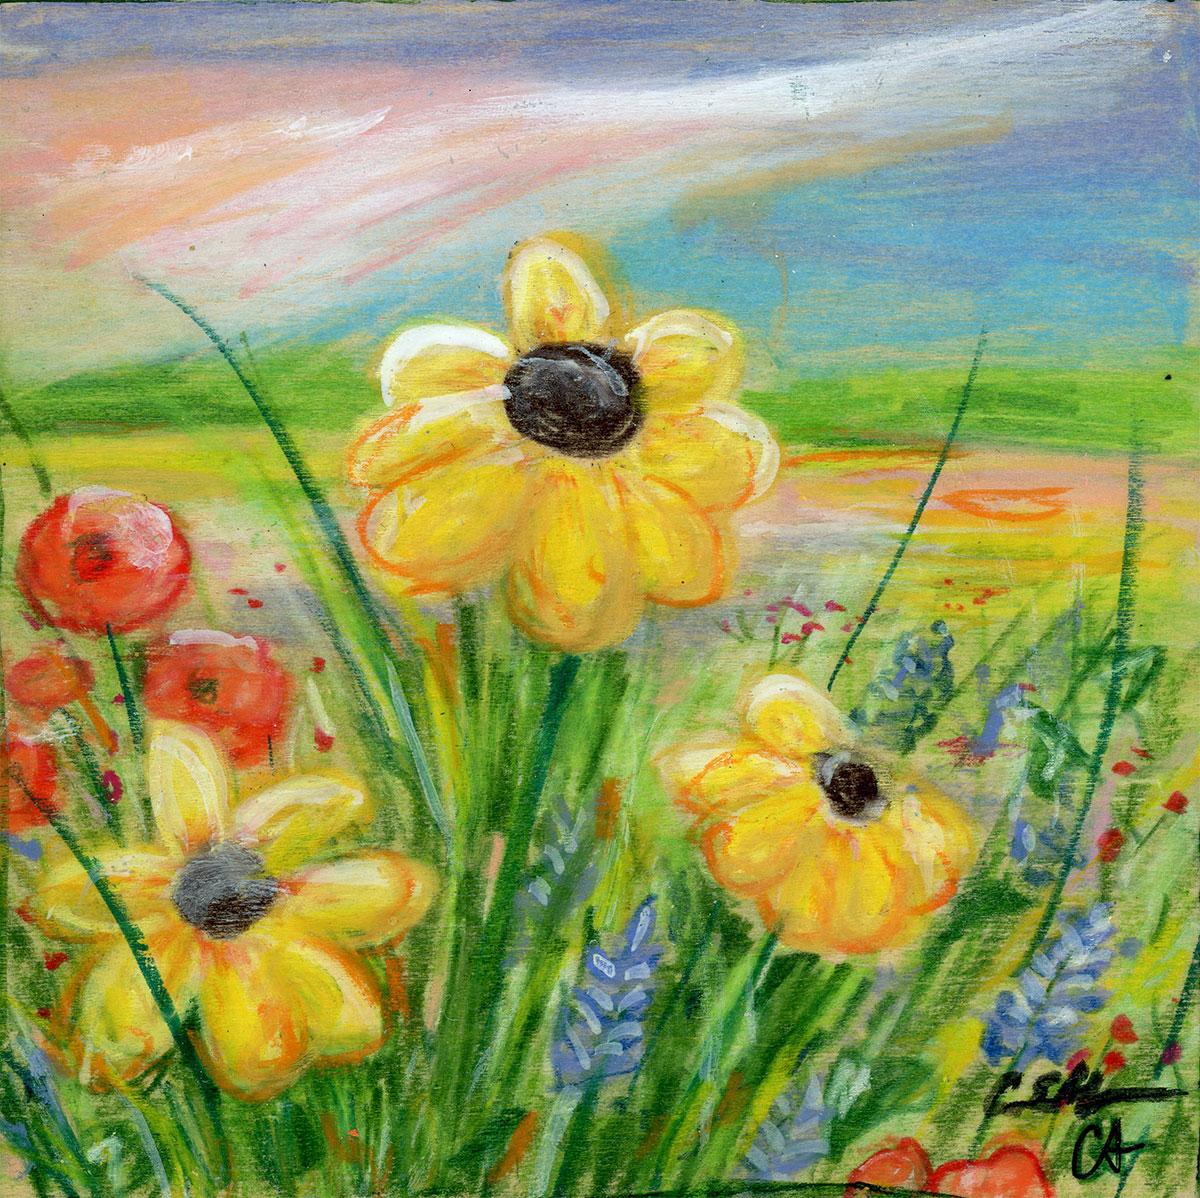 SOLD - "Wildflowers #4", 4" x 4", mixed media